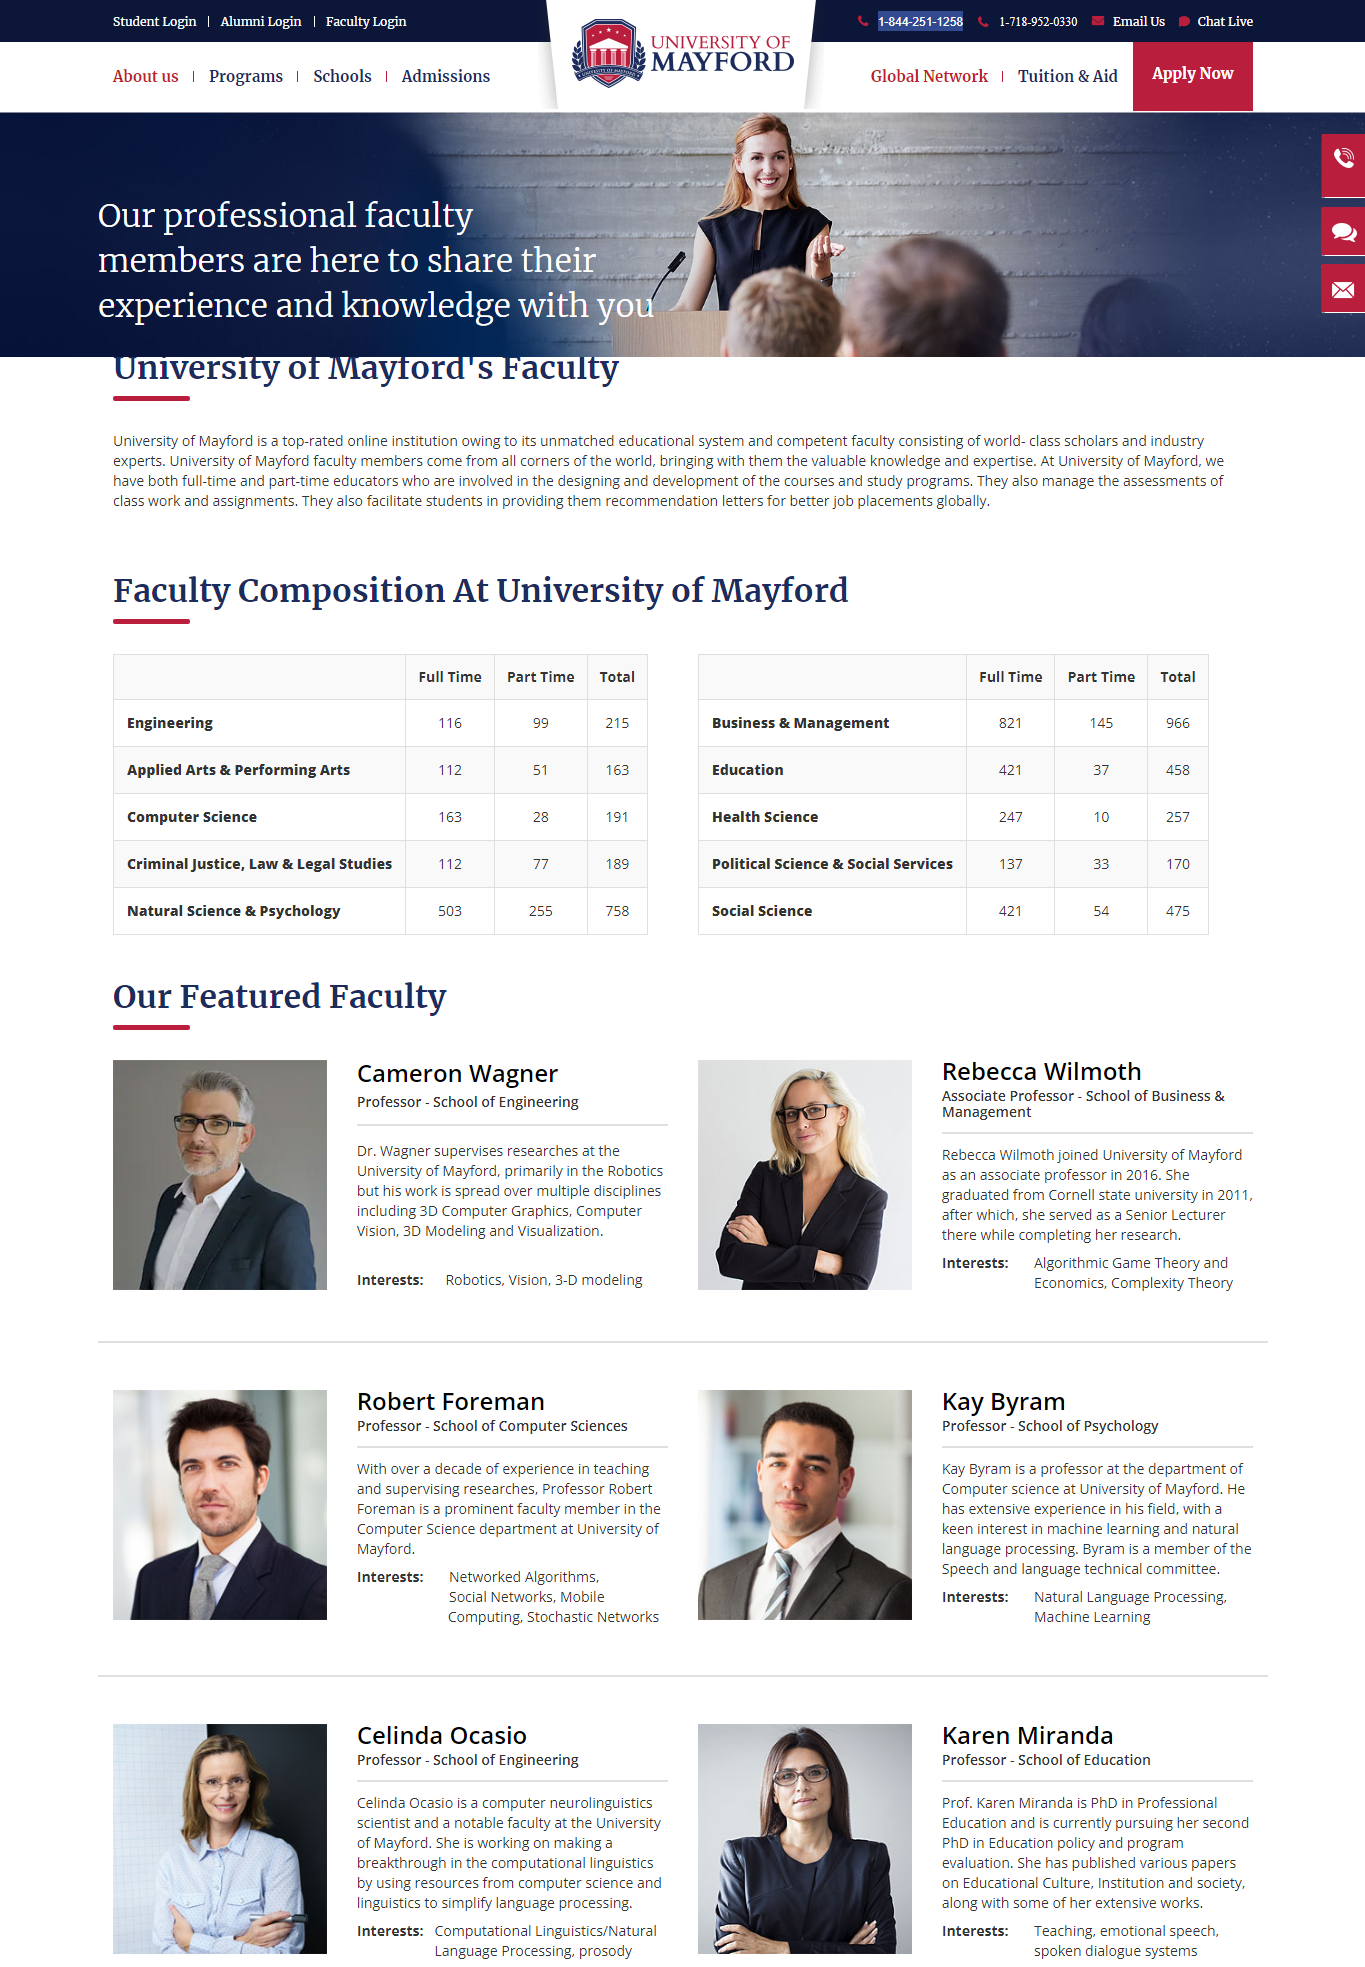 University of Mayford is fake - models